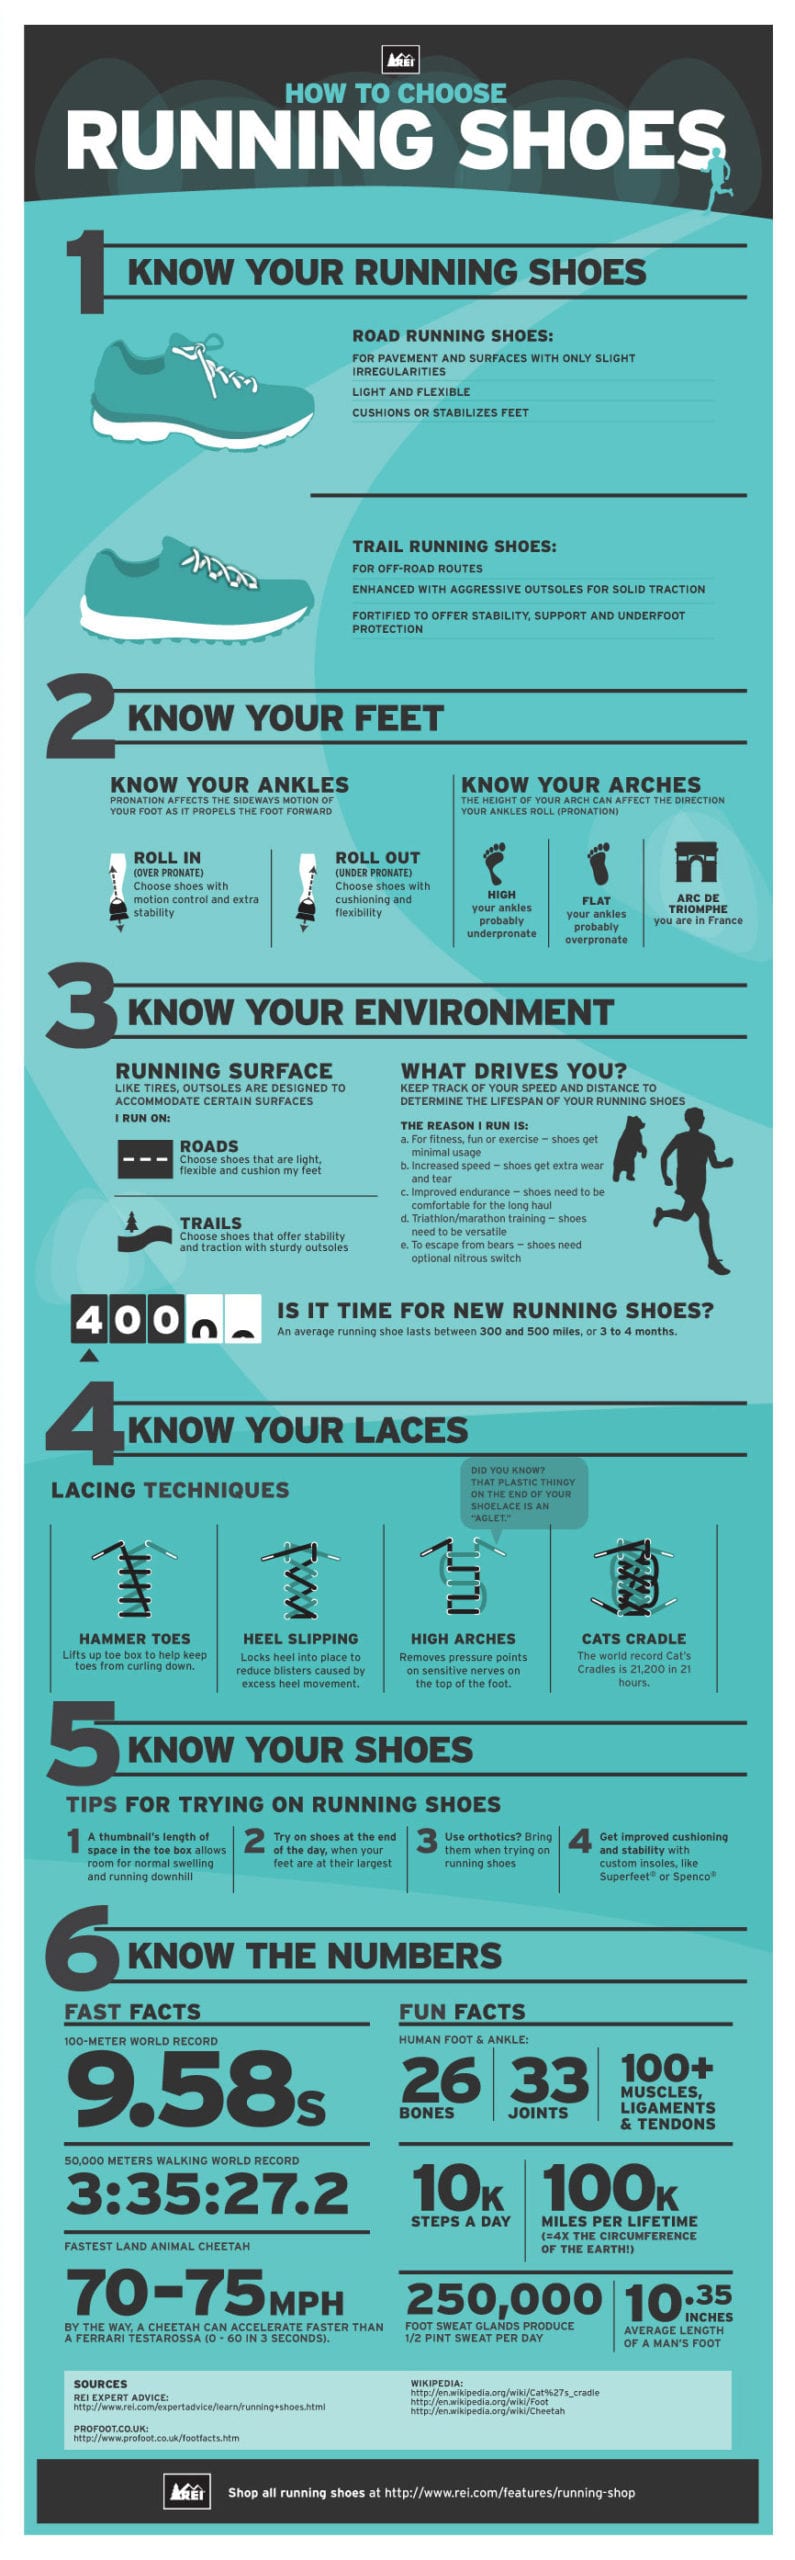 runningshoes_infographic